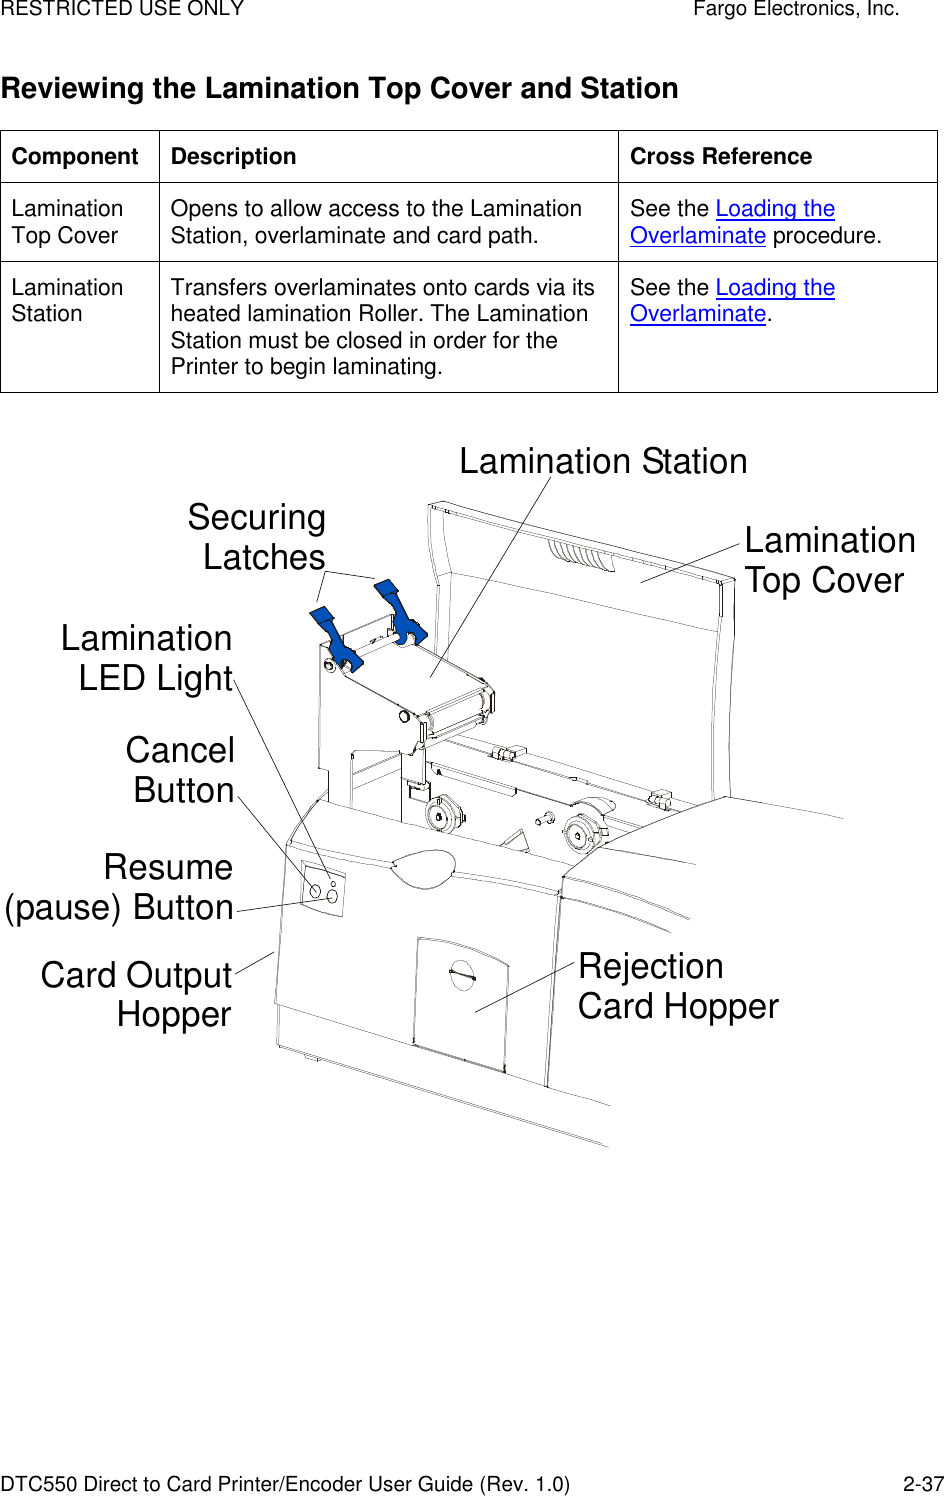 RESTRICTED USE ONLY    Fargo Electronics, Inc. DTC550 Direct to Card Printer/Encoder User Guide (Rev. 1.0)  2-37 Reviewing the Lamination Top Cover and Station Component  Description  Cross Reference Lamination Top Cover  Opens to allow access to the Lamination Station, overlaminate and card path.   See the Loading the Overlaminate procedure. Lamination Station  Transfers overlaminates onto cards via its heated lamination Roller. The Lamination Station must be closed in order for the Printer to begin laminating.  See the Loading the Overlaminate.  LaminationTop CoverSecuringLatchesLamination StationLaminationLED LightCancelButtonResume(pause) ButtonRejectionCard HopperCard OutputHopper  